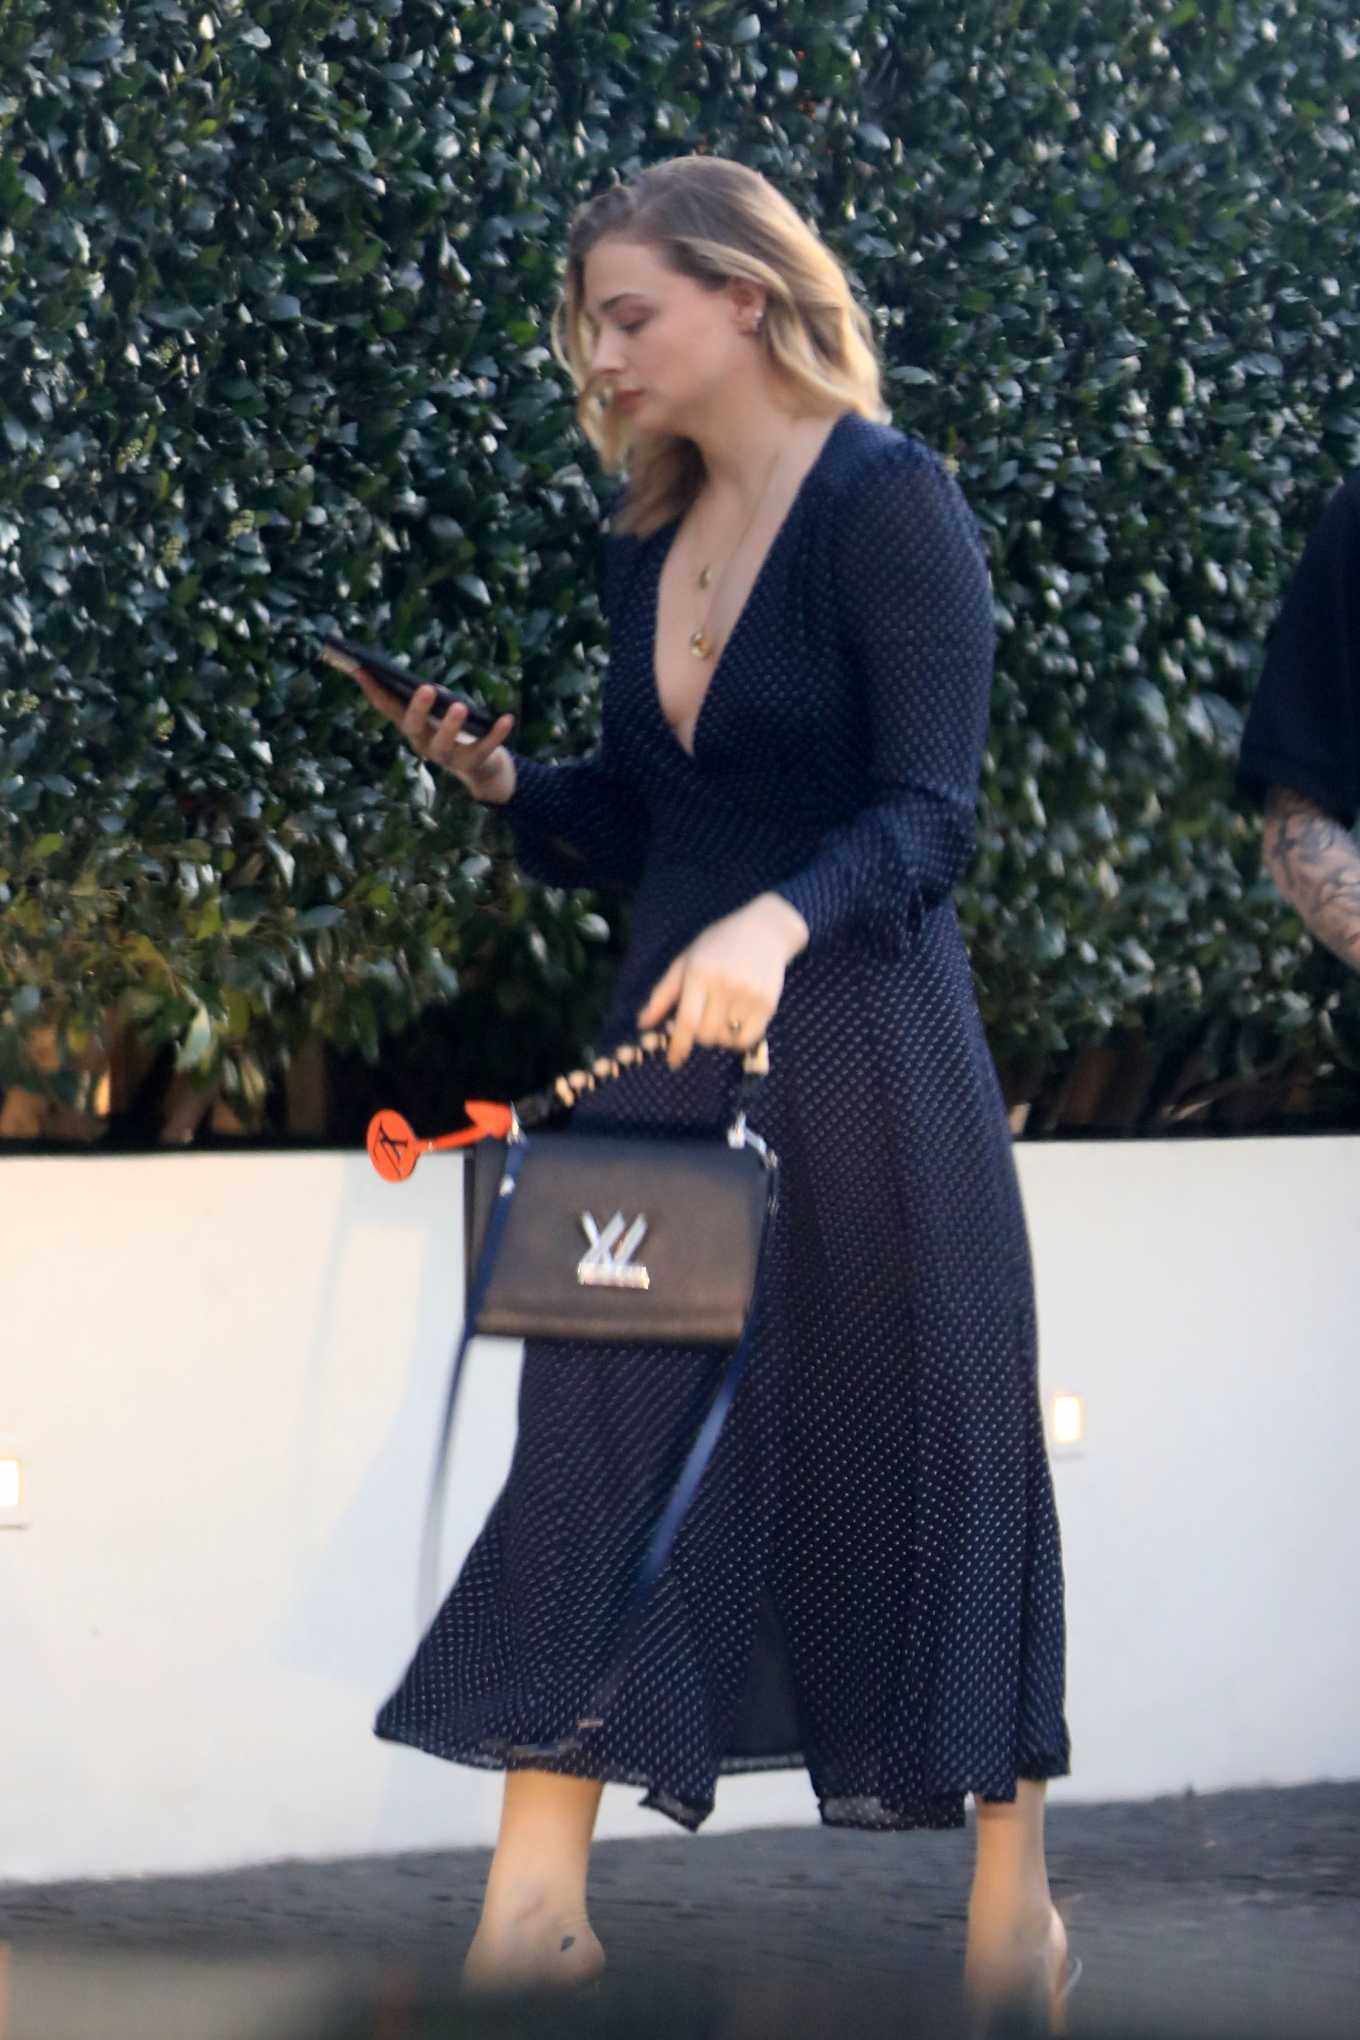 Chloe Moretz in Long Dress - Out with her brother in Hollywood